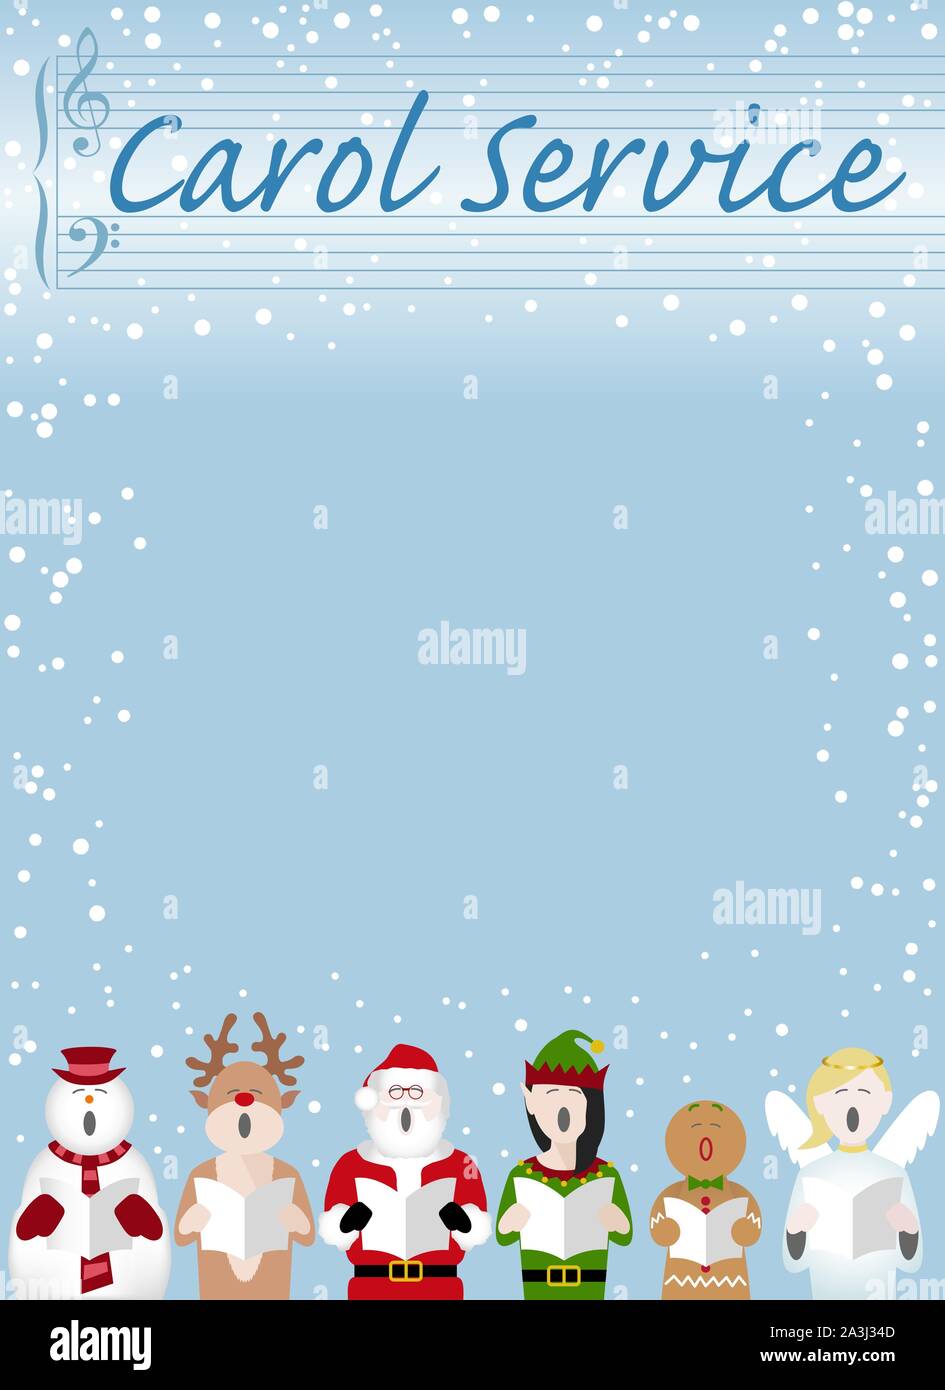 Christmas carol service poster design with a snowman, father Christmas, gingerbread man, reindeer, elf and fairy characters singing in the snow. Vecto Stock Vector